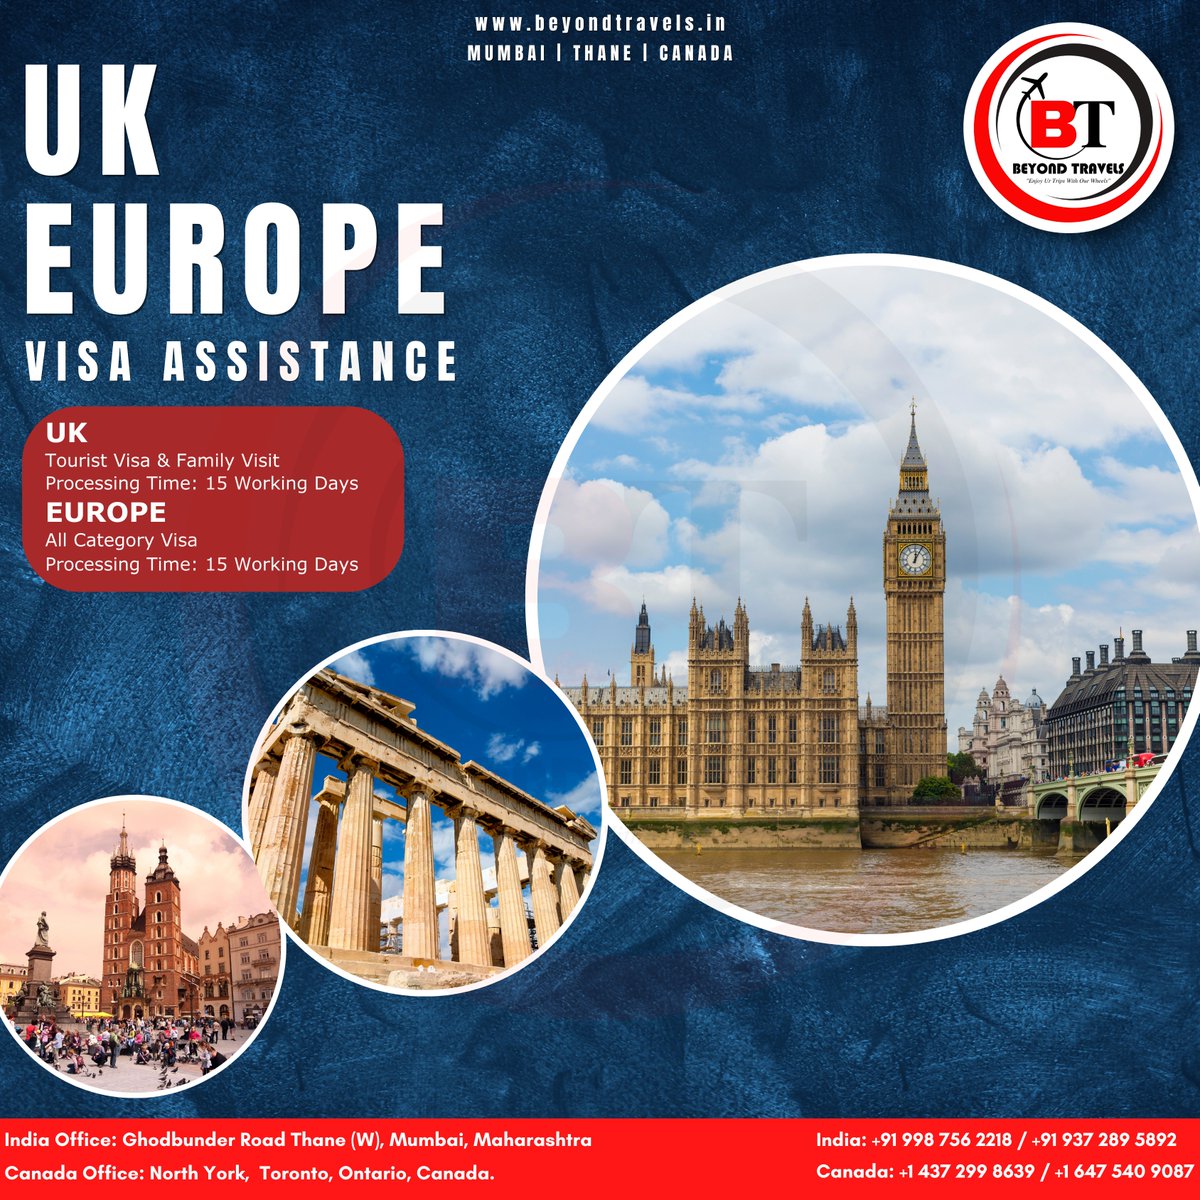 'Turn your travel dreams into reality with our UK and Europe visa assistance. Your gateway to a seamless and unforgettable adventure! 🗺️✨ #VisaMagic #TravelGoals'
@beyondtravels_